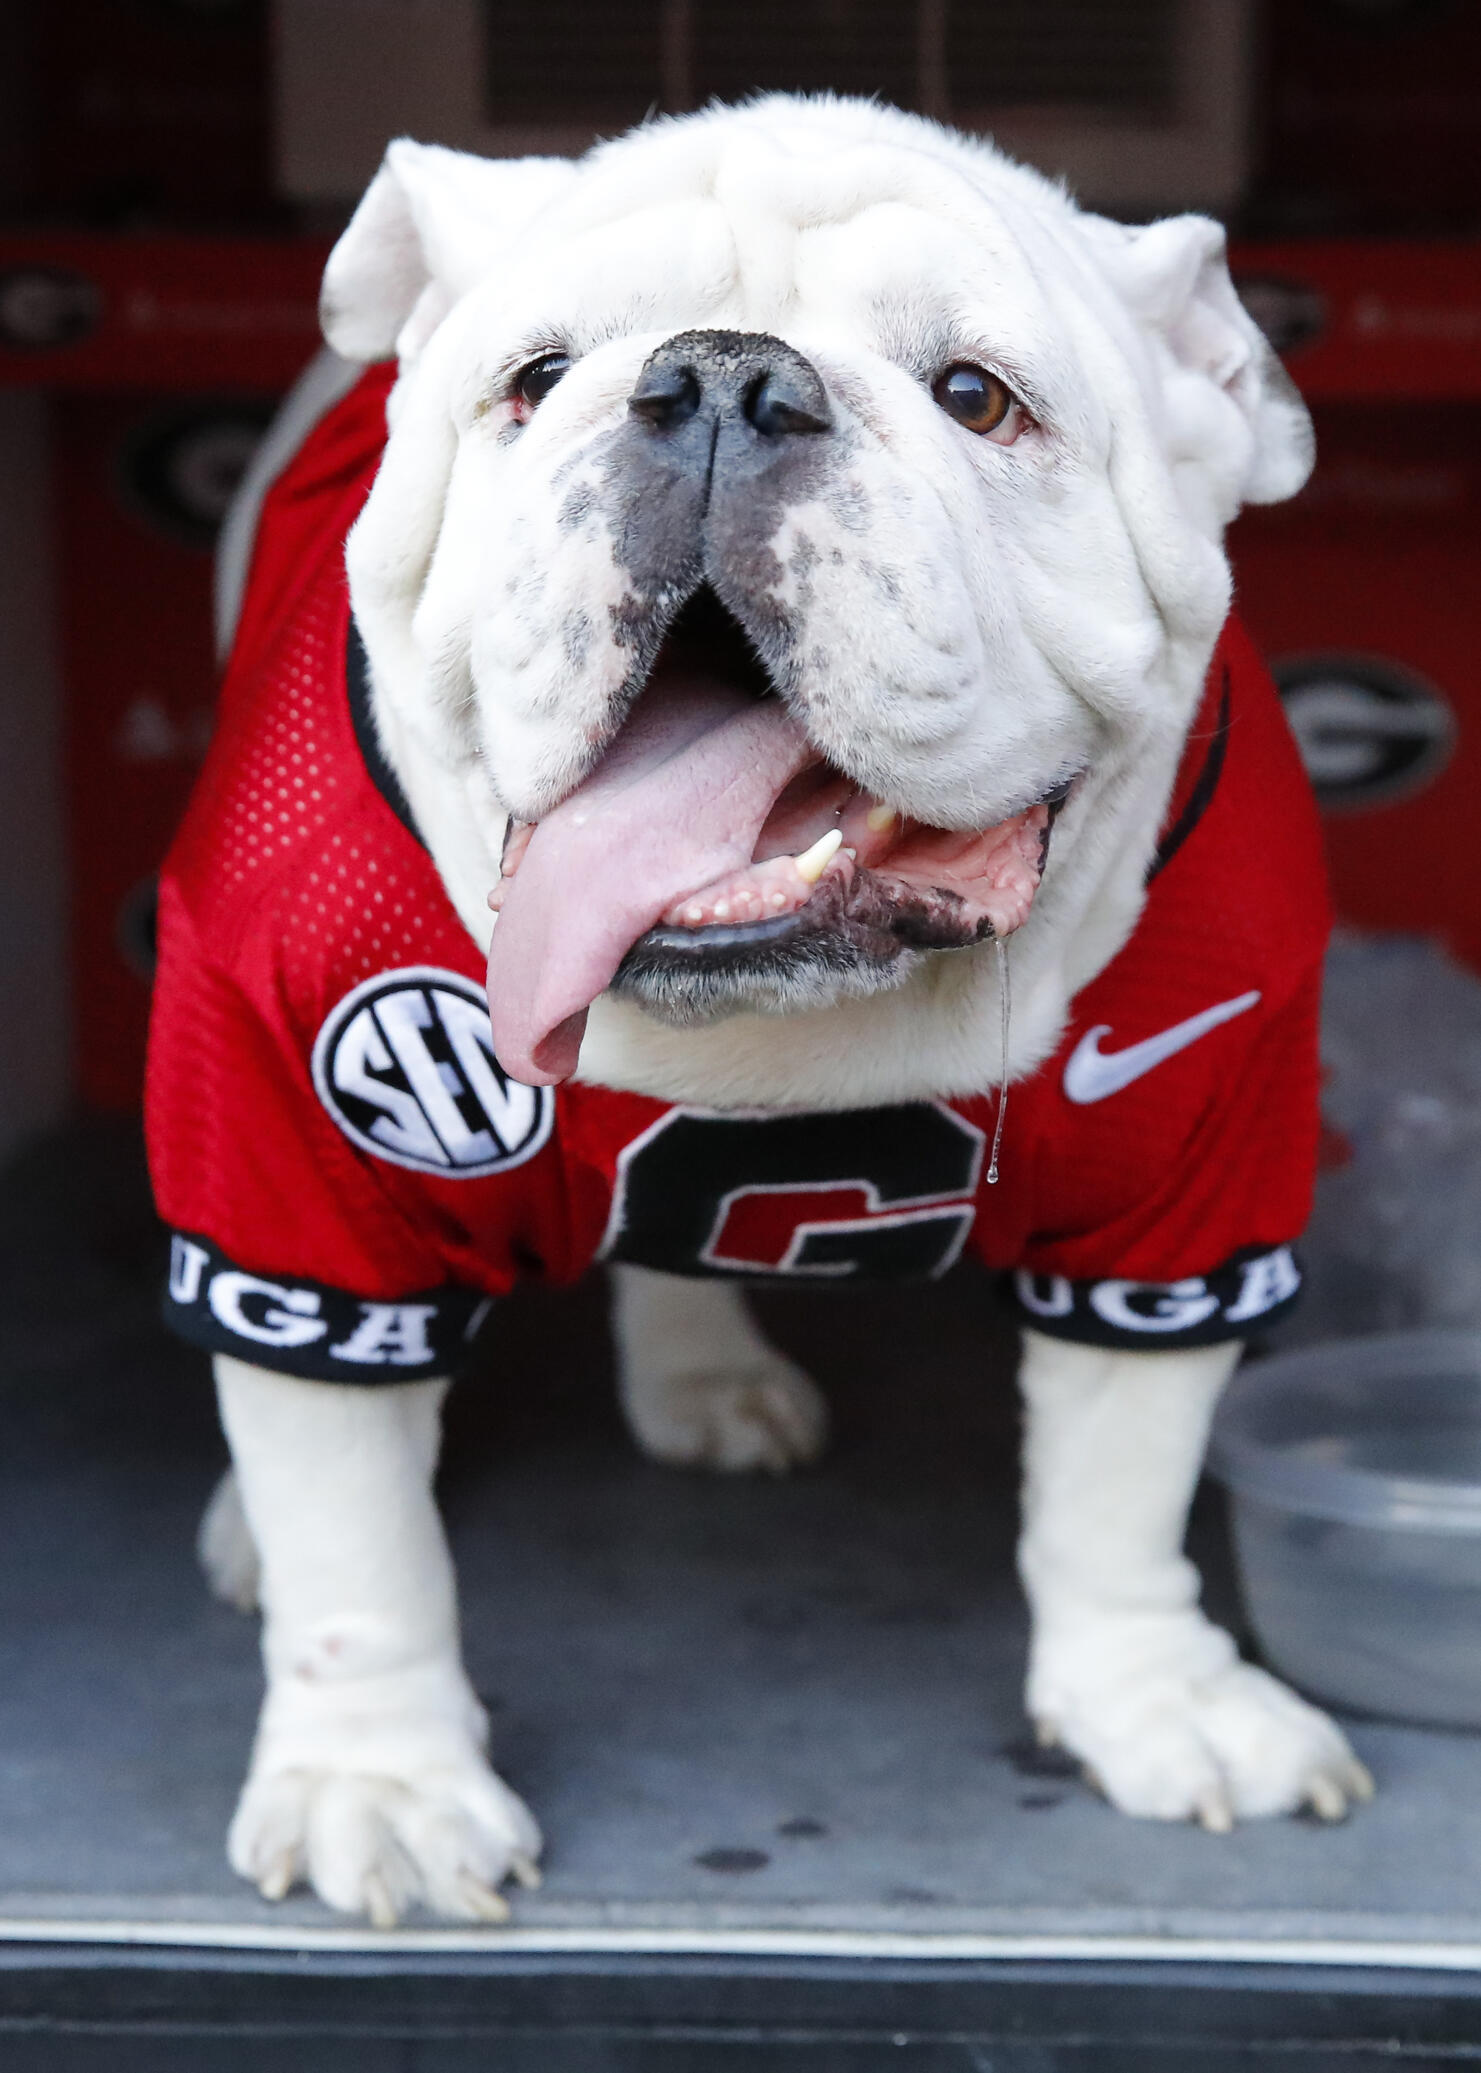 College Football Playoff on X: THE GEORGIA BULLDOGS ARE YOUR 2022 NATIONAL  CHAMPIONS!!!!! #GoDawgs x #cfbplayoff  / X